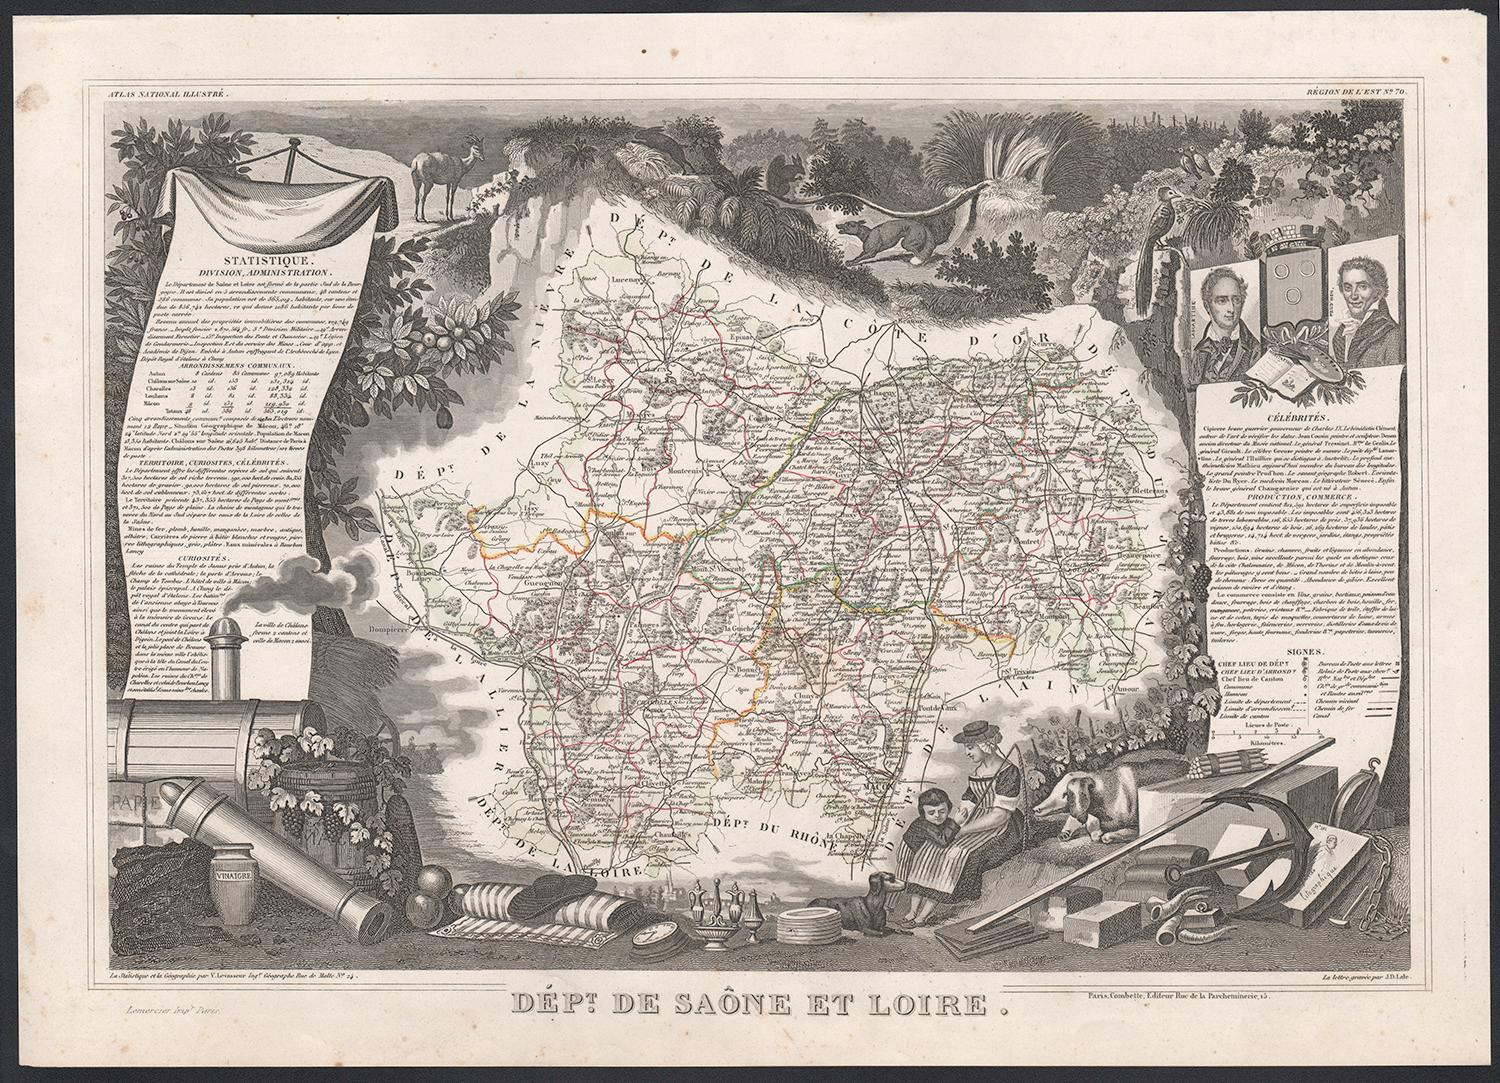 Saone and Loire, France. Antique map of a French department, 1856